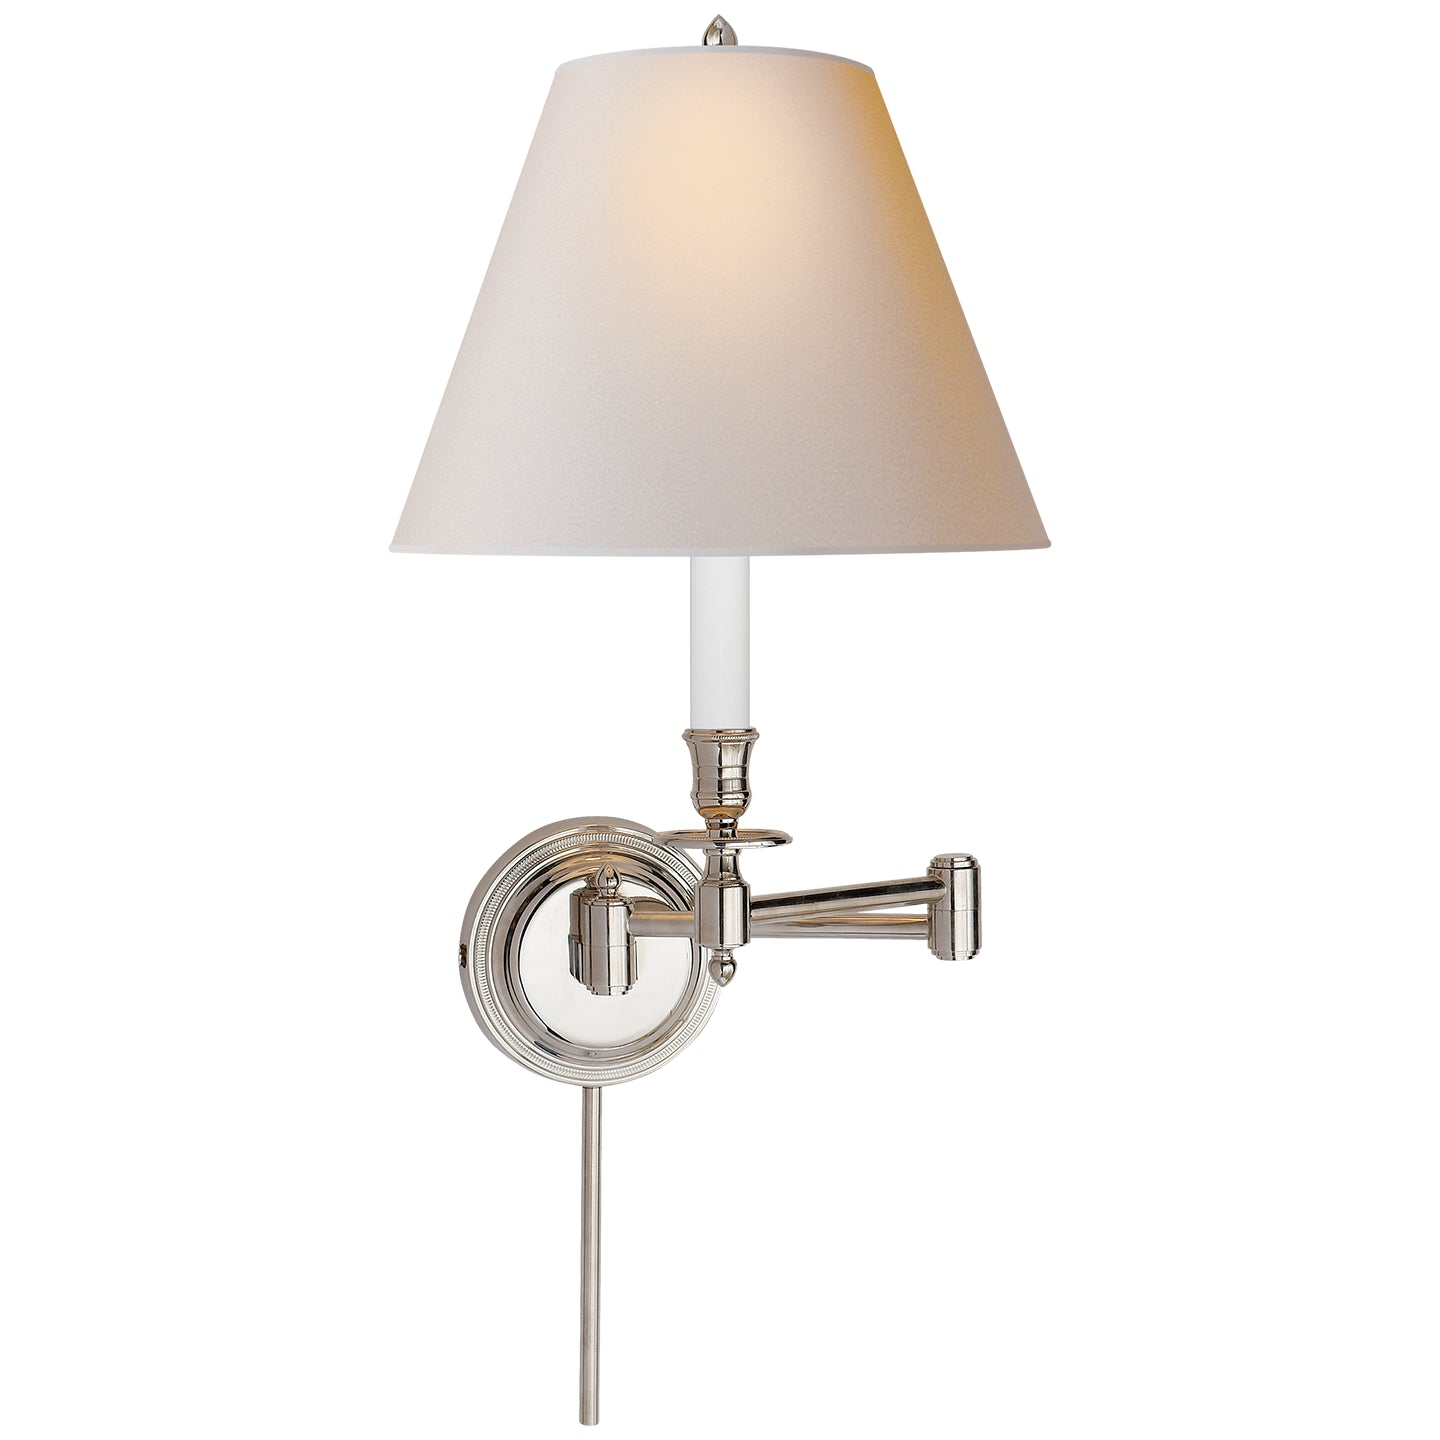 Visual Comfort Signature - S 2010PN-NP - One Light Wall Sconce - Candle Stick - Polished Nickel